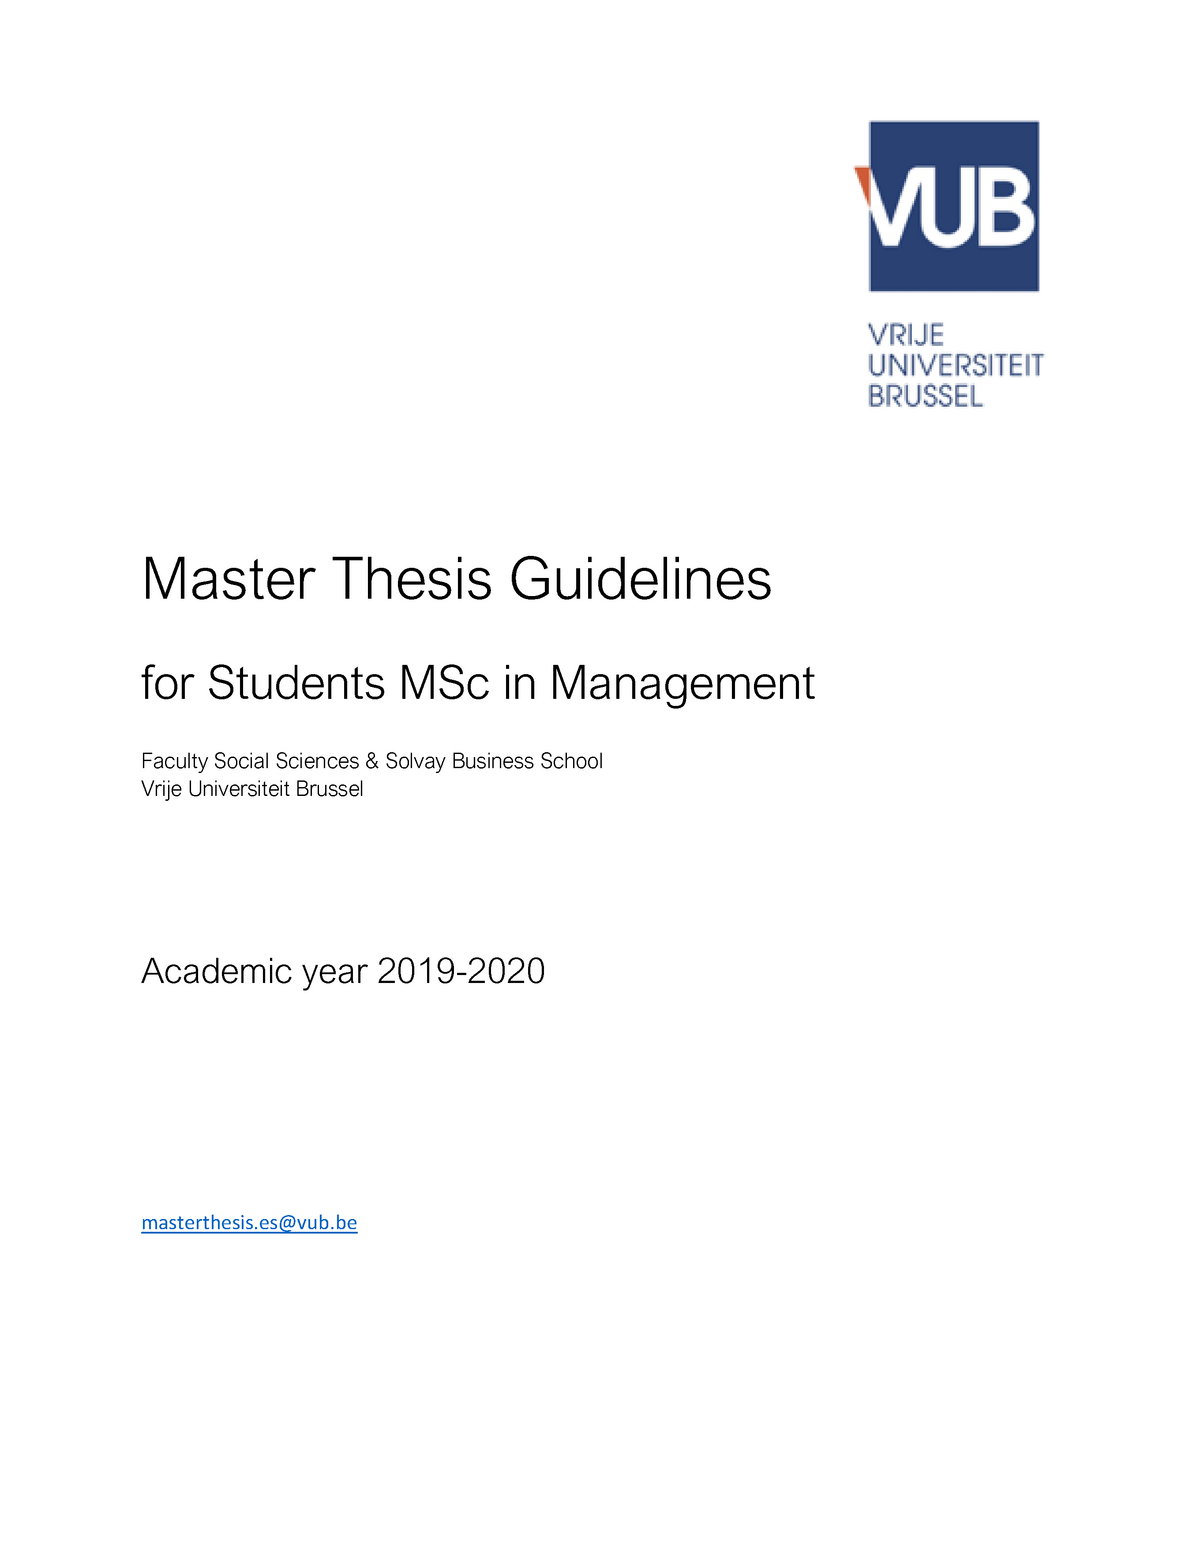 epfl master thesis guidelines